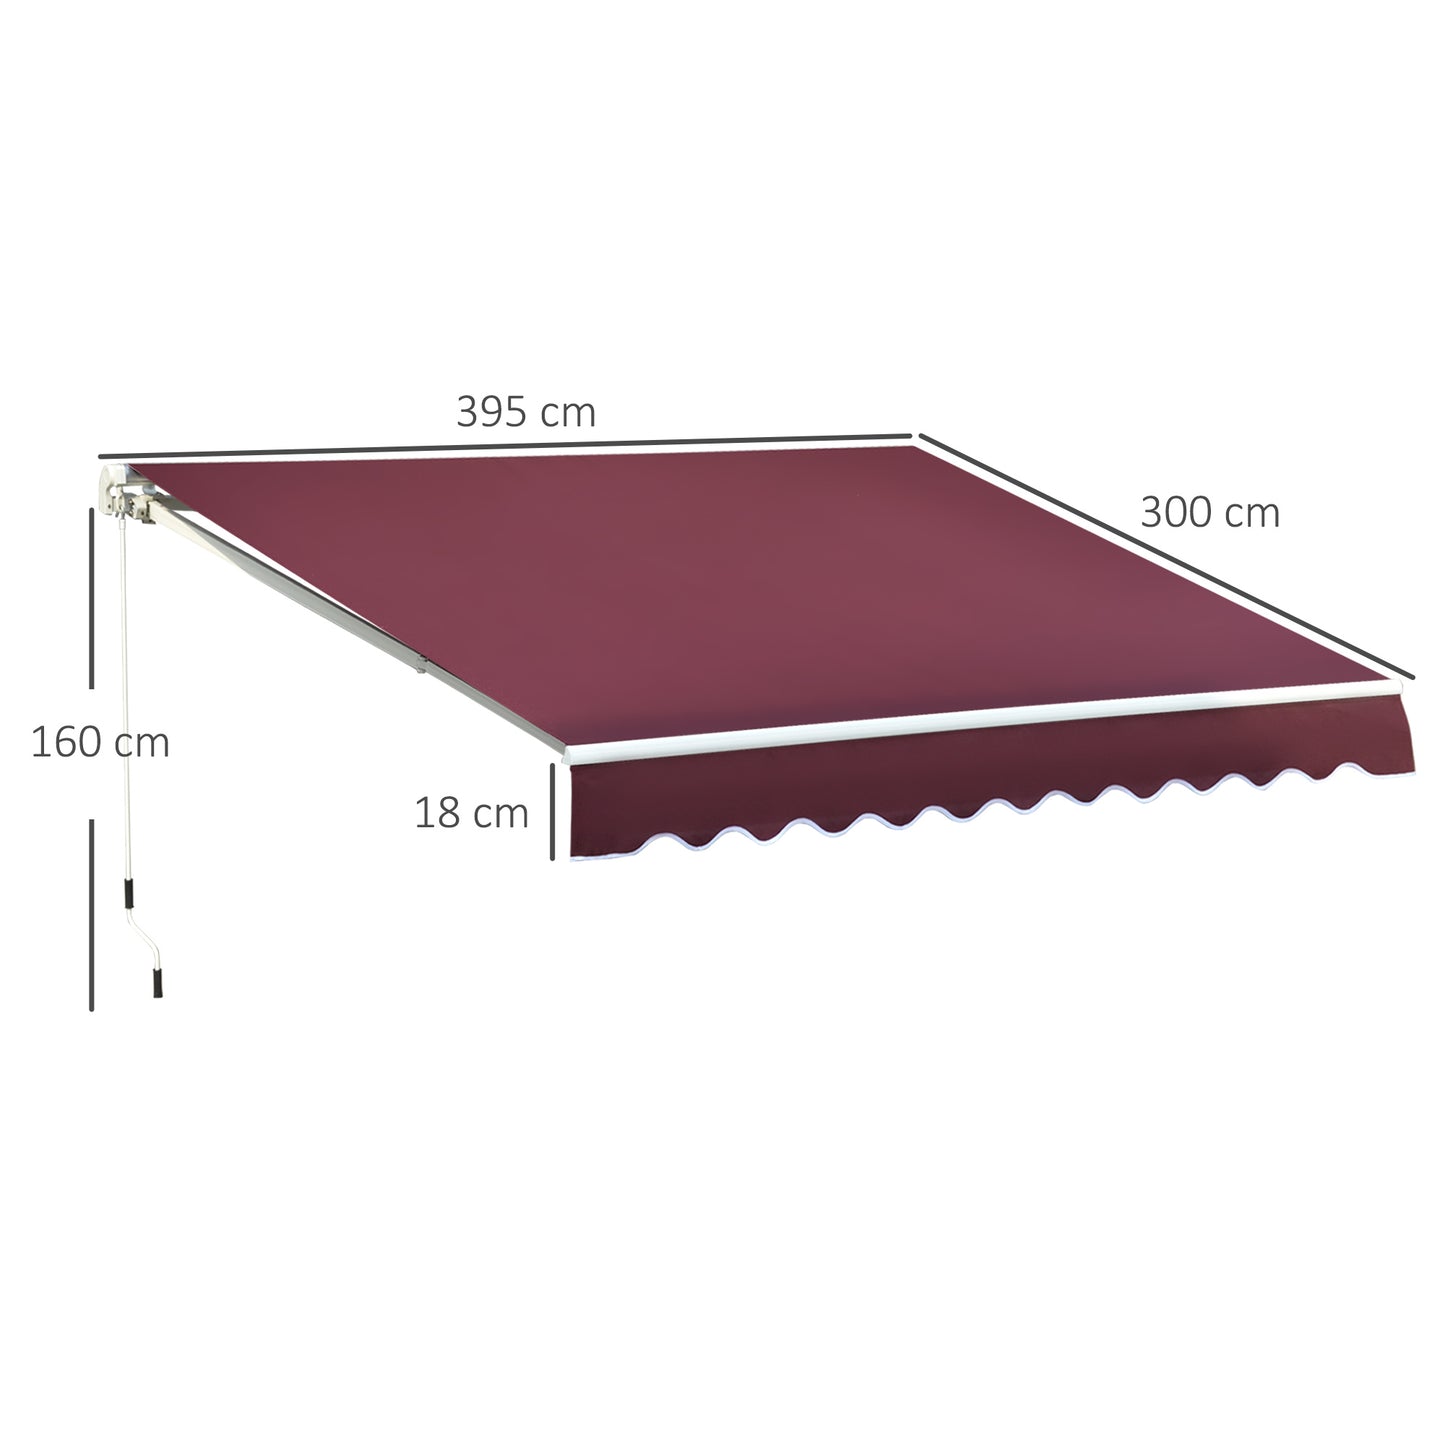 Outsunny 3x4m Garden Patio Retractable Manual Awning Window Door Sun Shade Canopy with Fittings and Crank Handle Wine Red